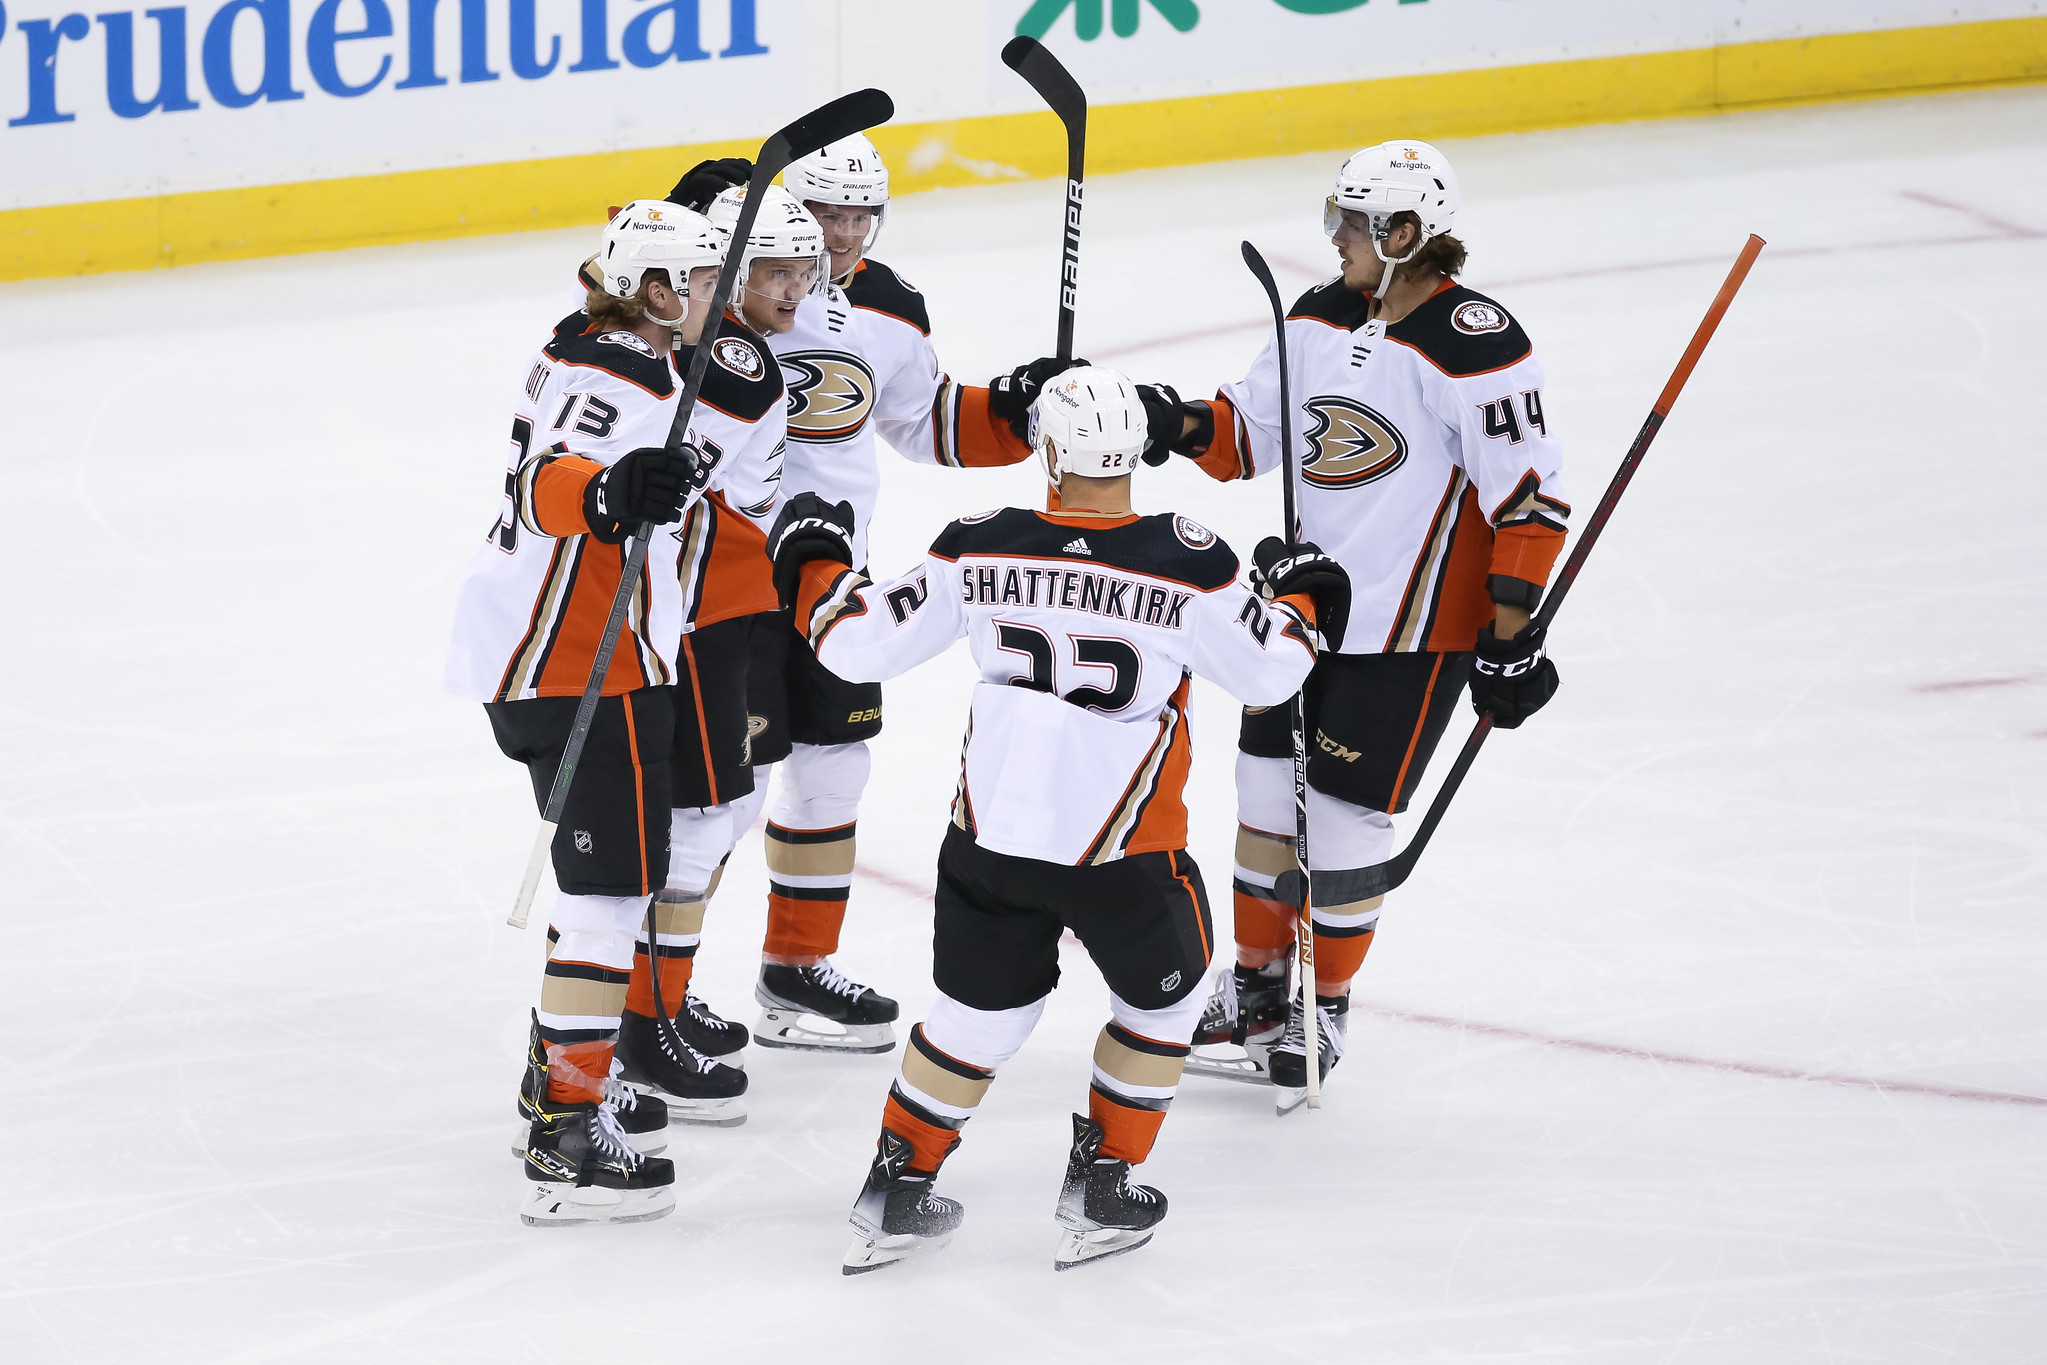 The LA Kings make it 3 in a row with a convincing win over the Ducks 